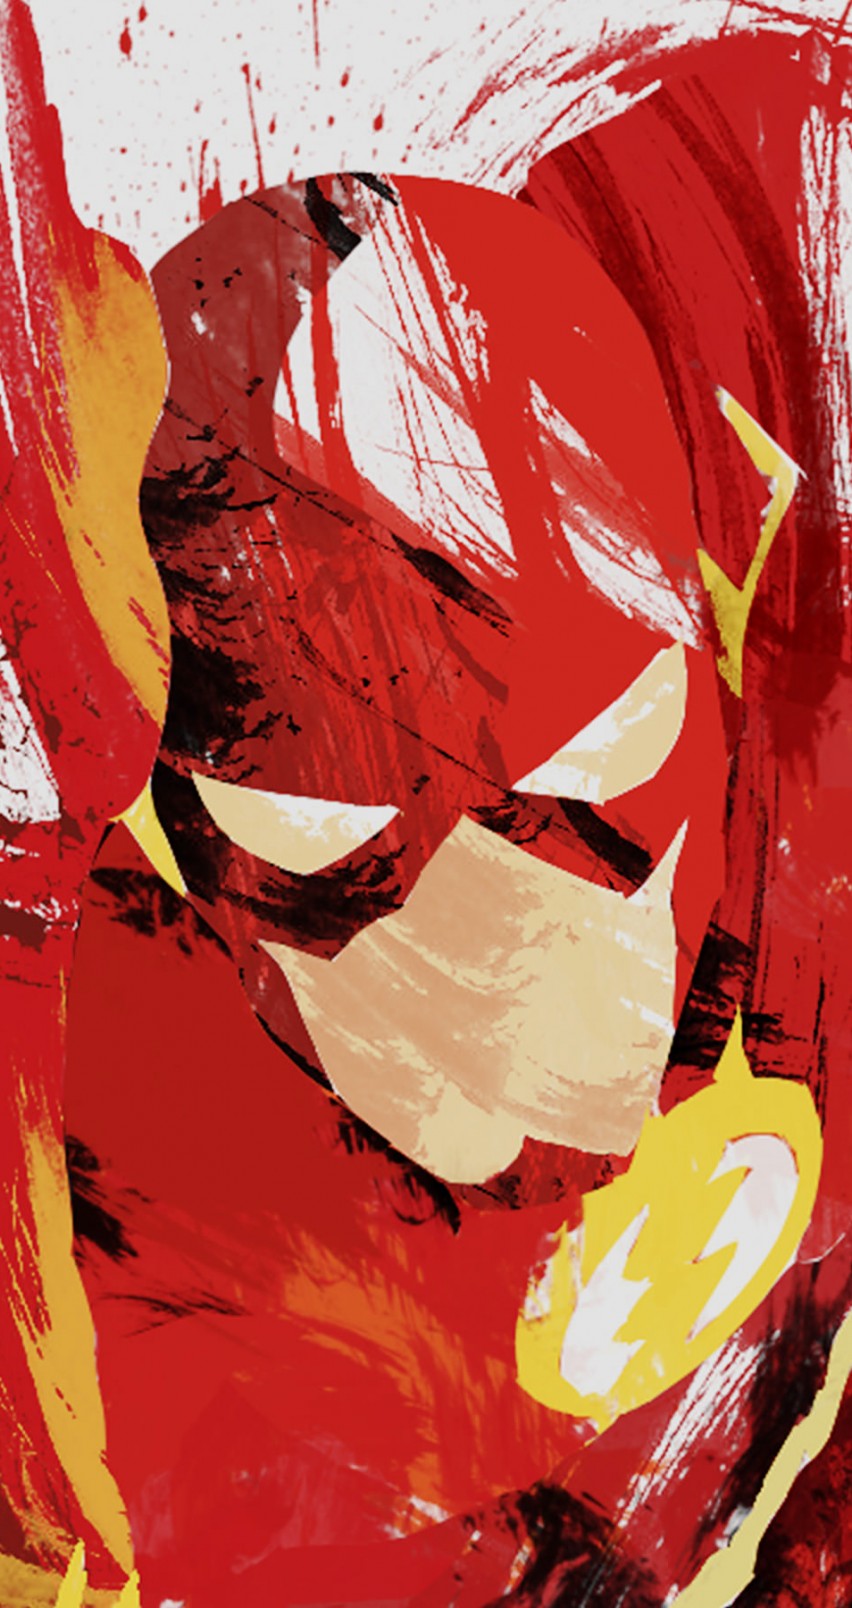 The Flash Illustration HD Wallpaper For iPhone HDwallpaper